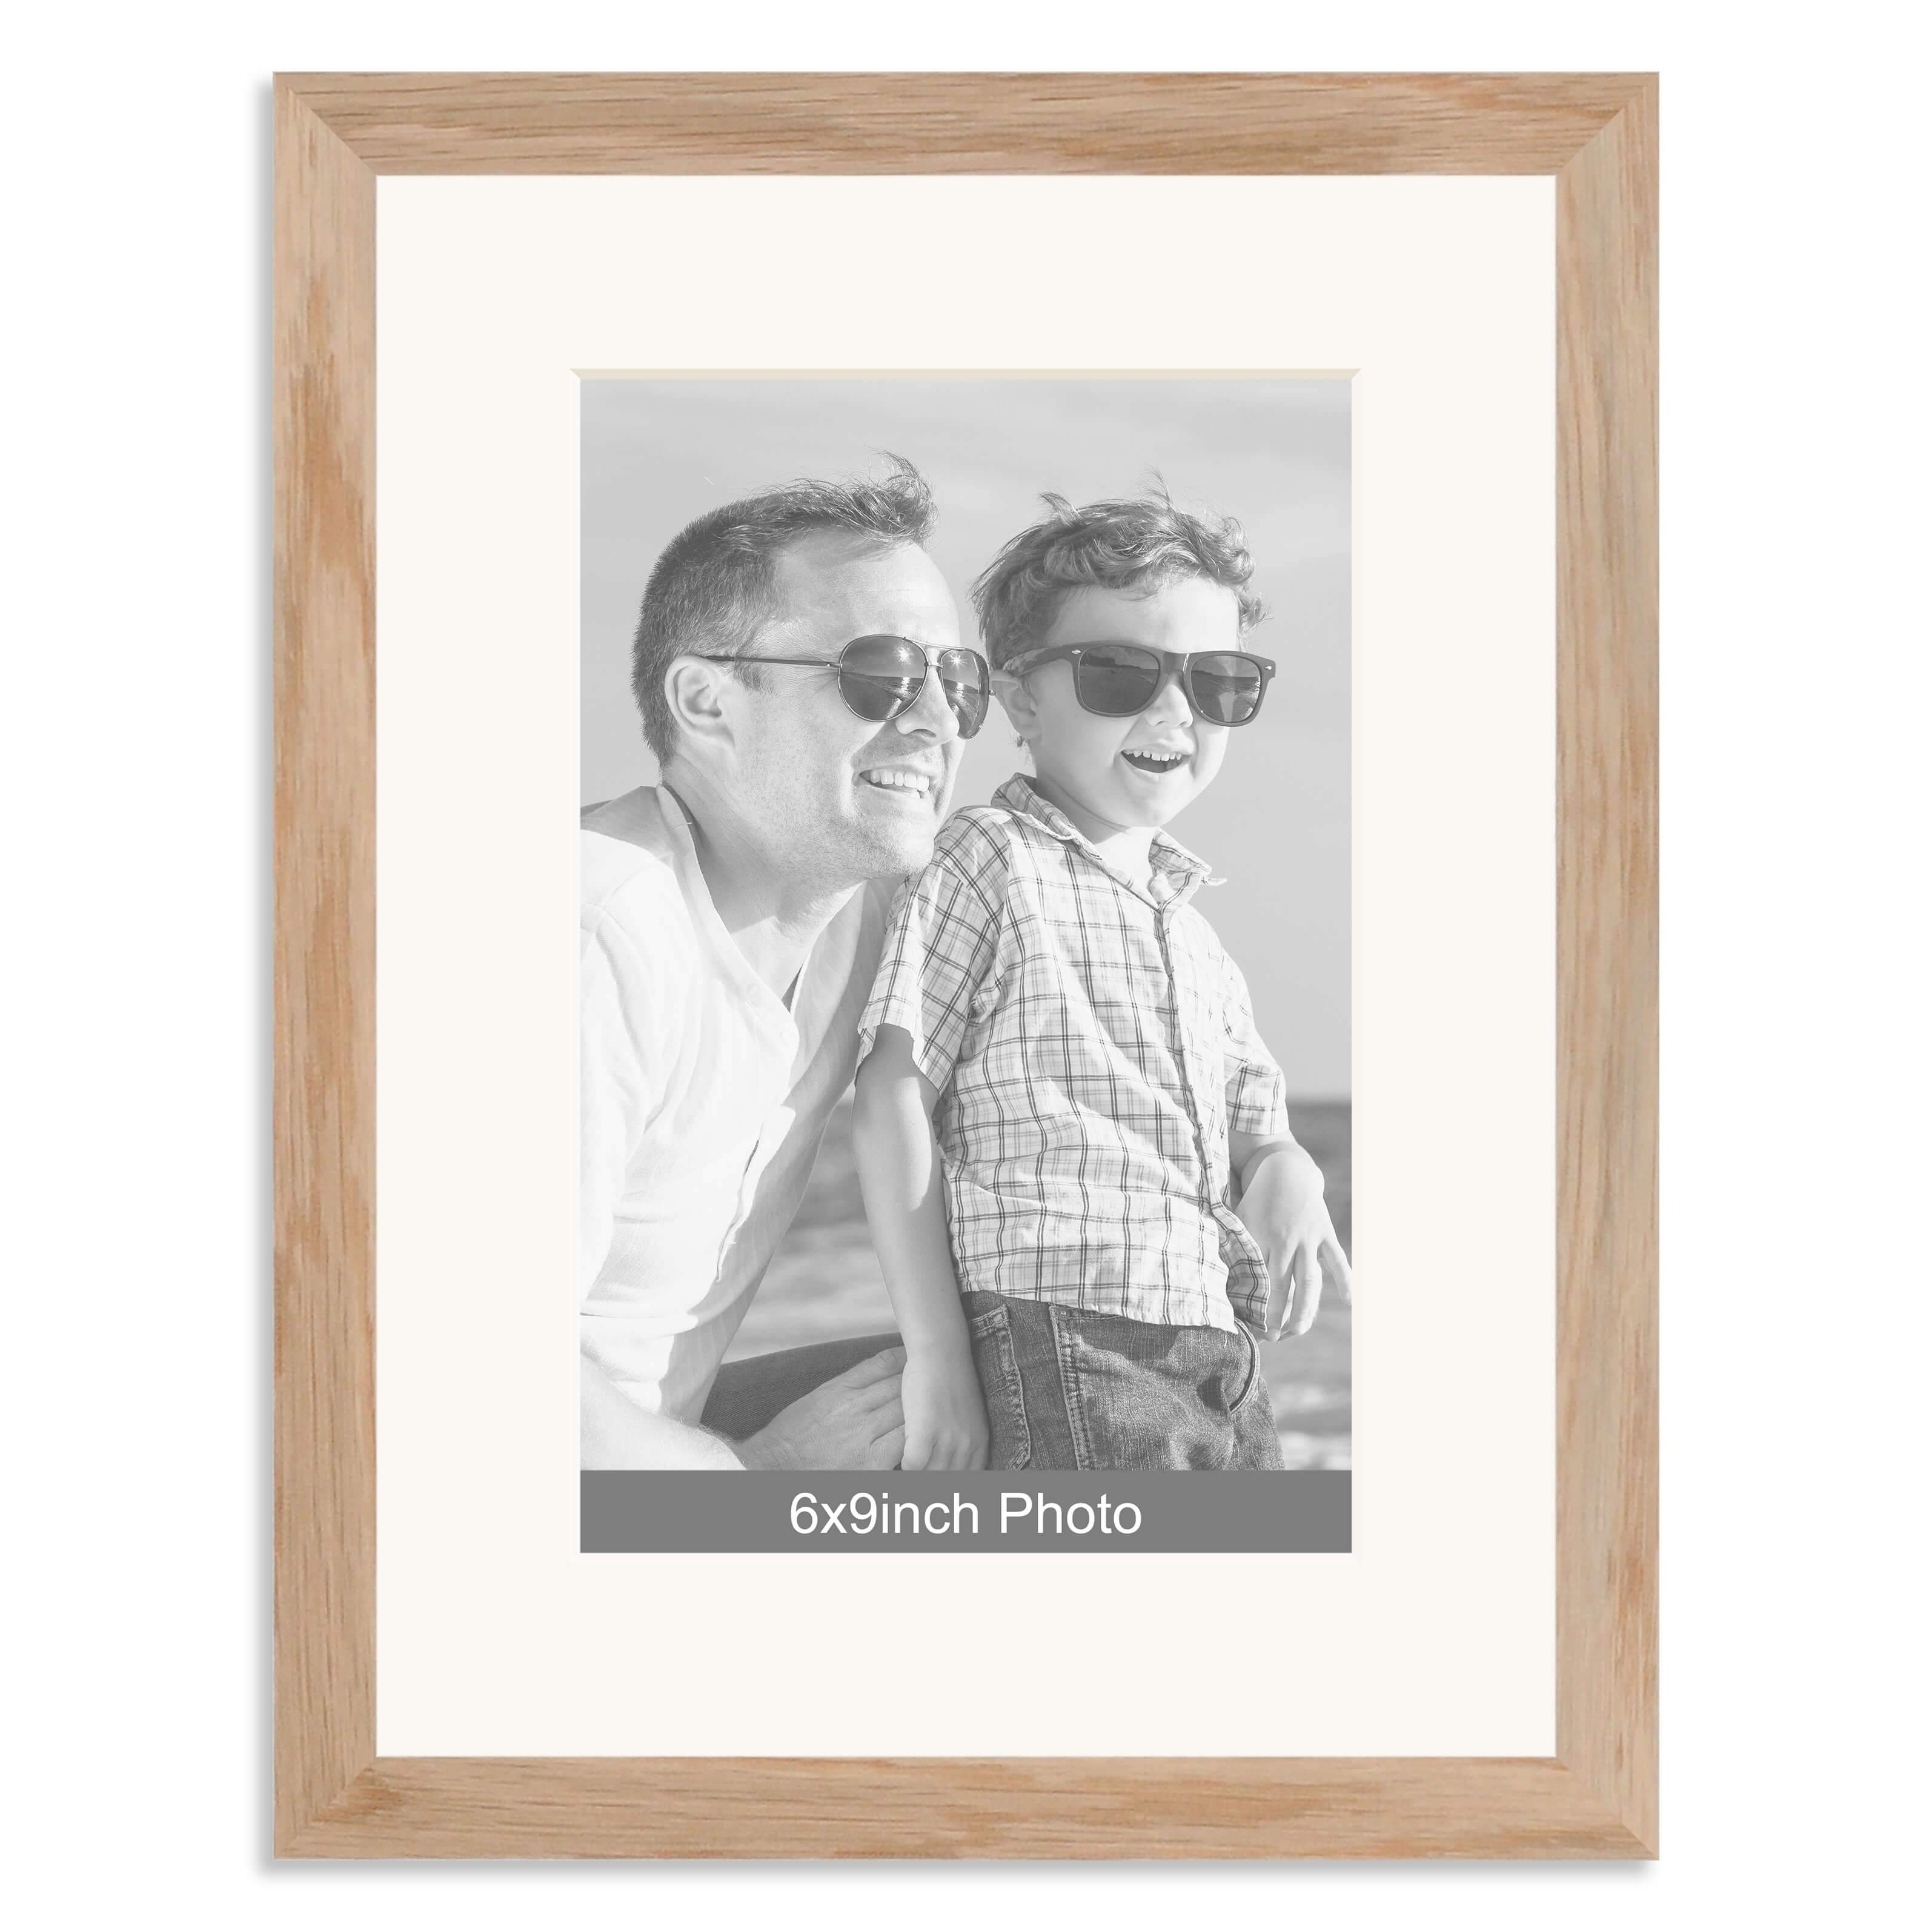 Solid Oak Photo Frame with mount for a 9×6/6x9in Photo – No Photo required